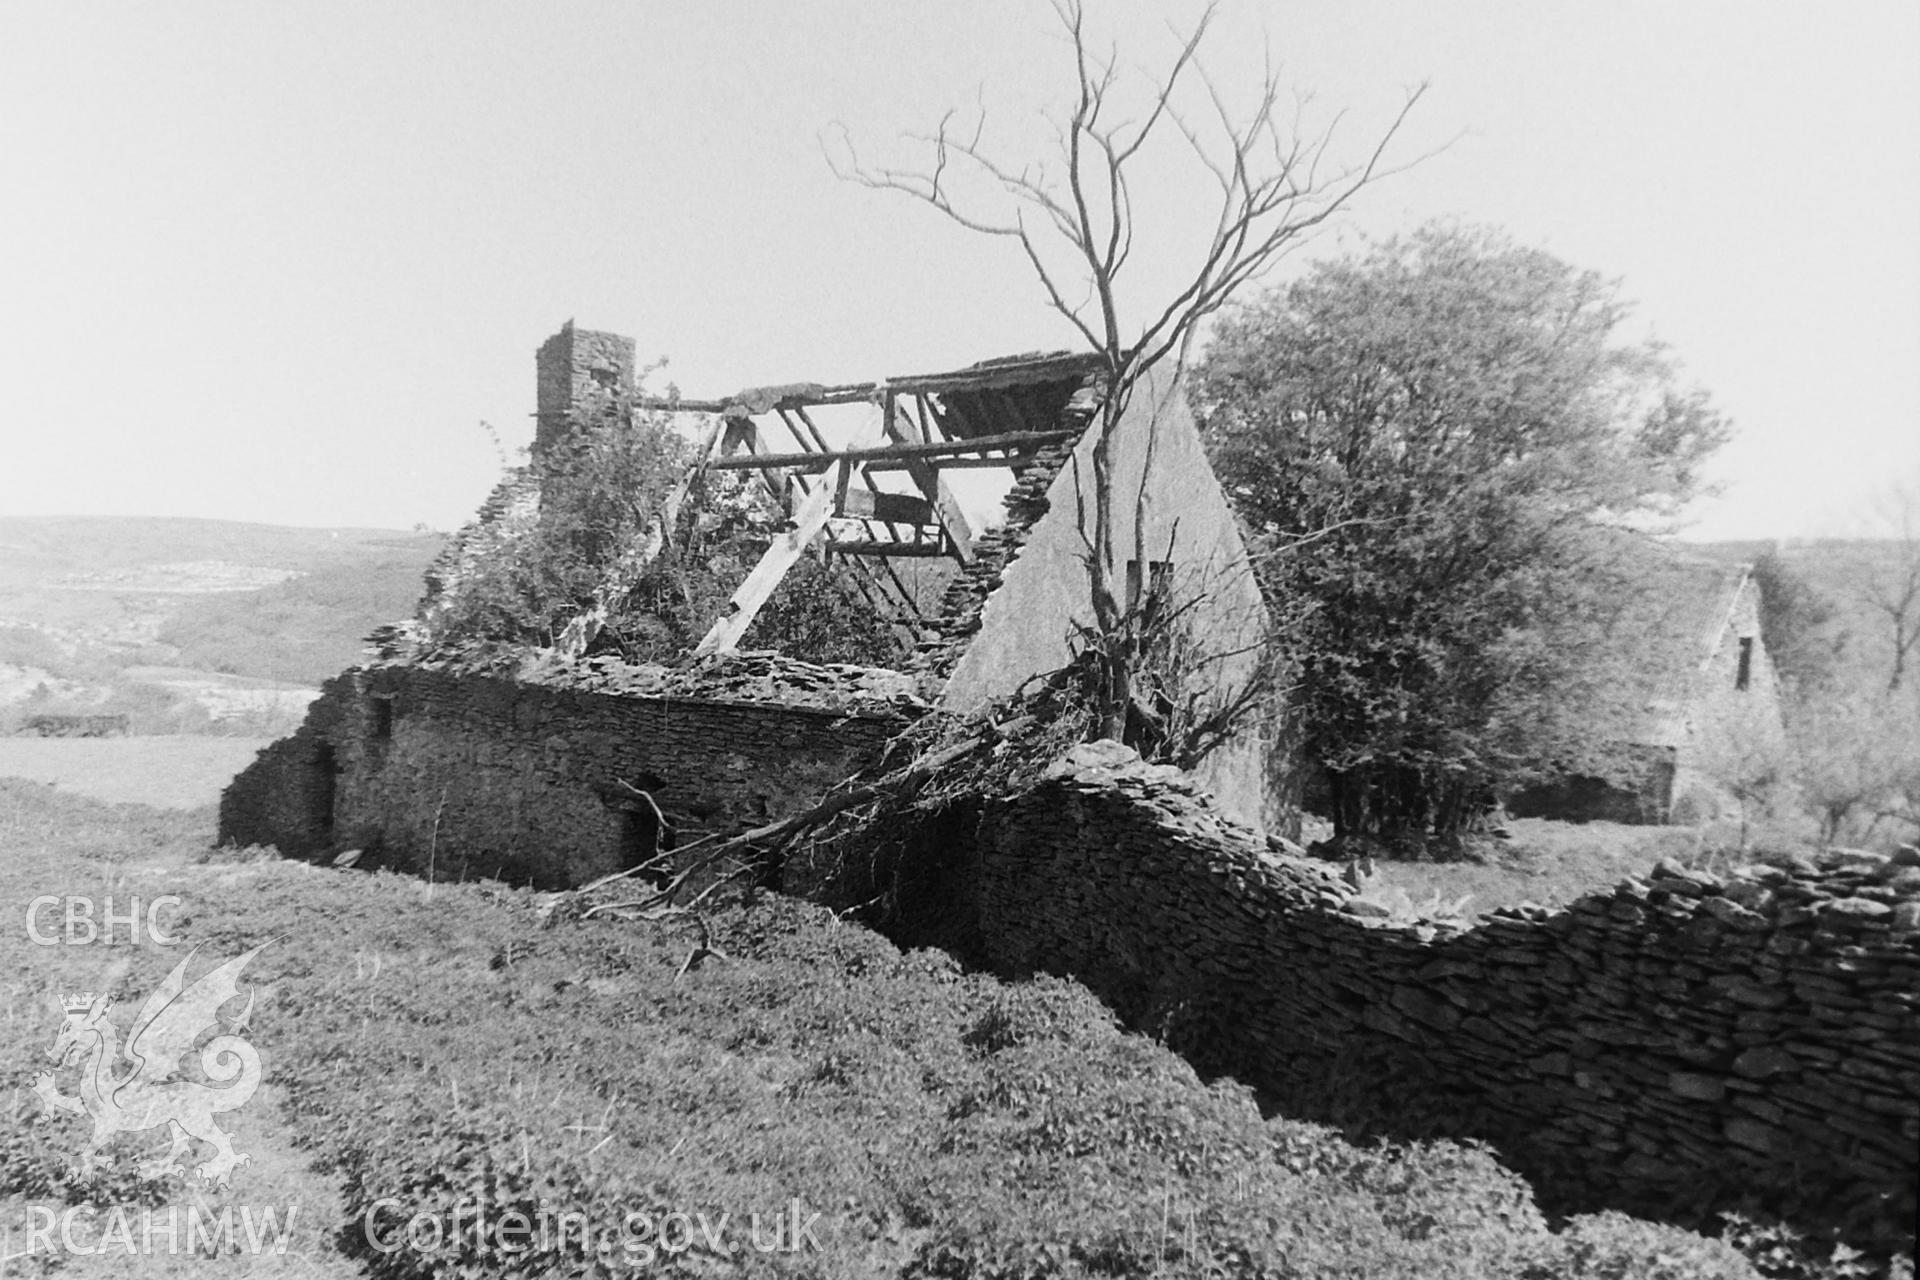 Black and white photo showing Pennar Fach, taken by Paul R. Davis, undated.